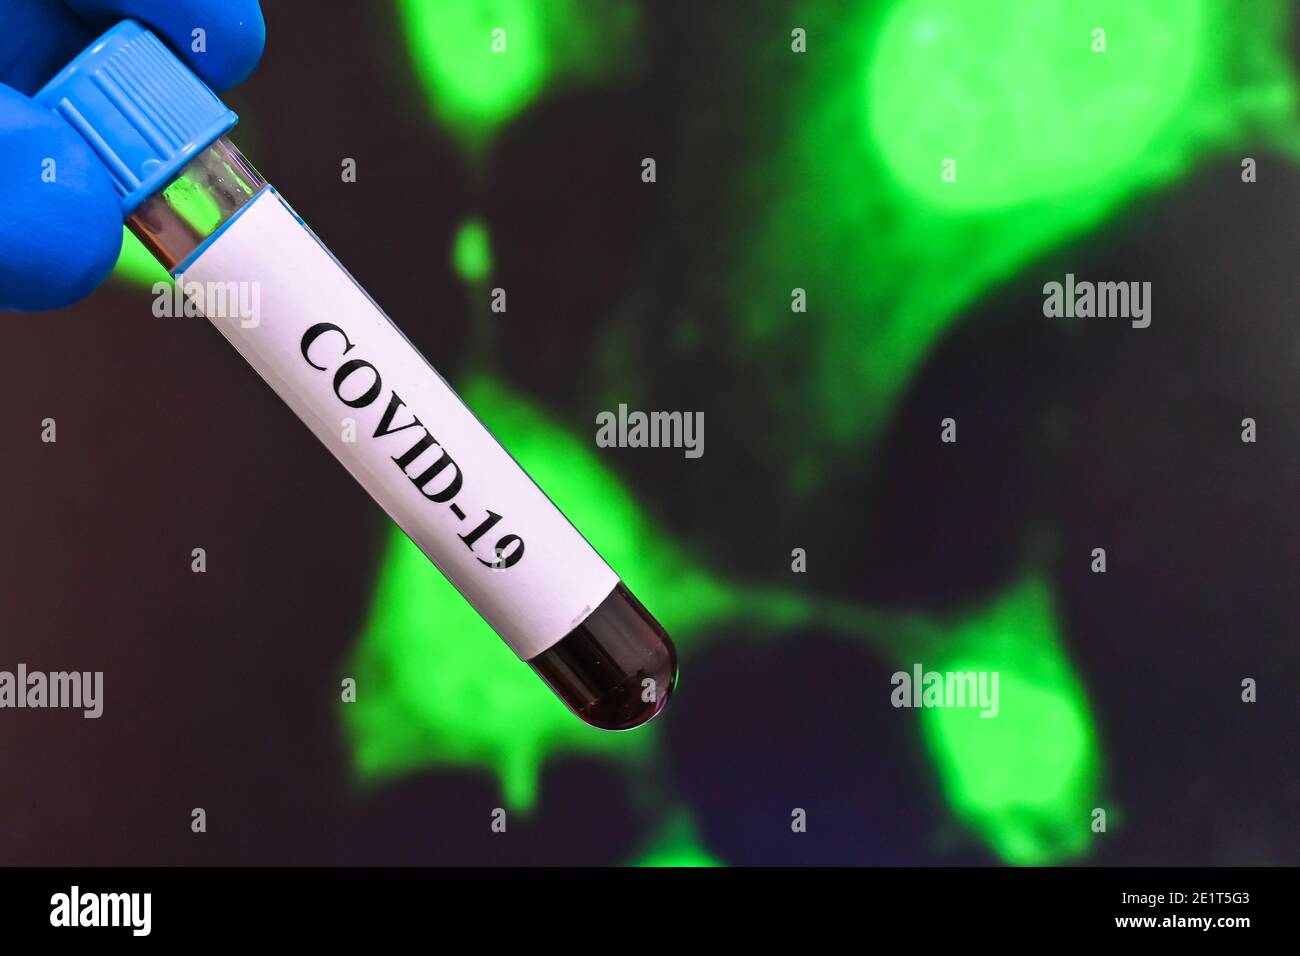 Coronavirus test. Detection of antibodies for COVID-19 in a blood sample. Stock Photo